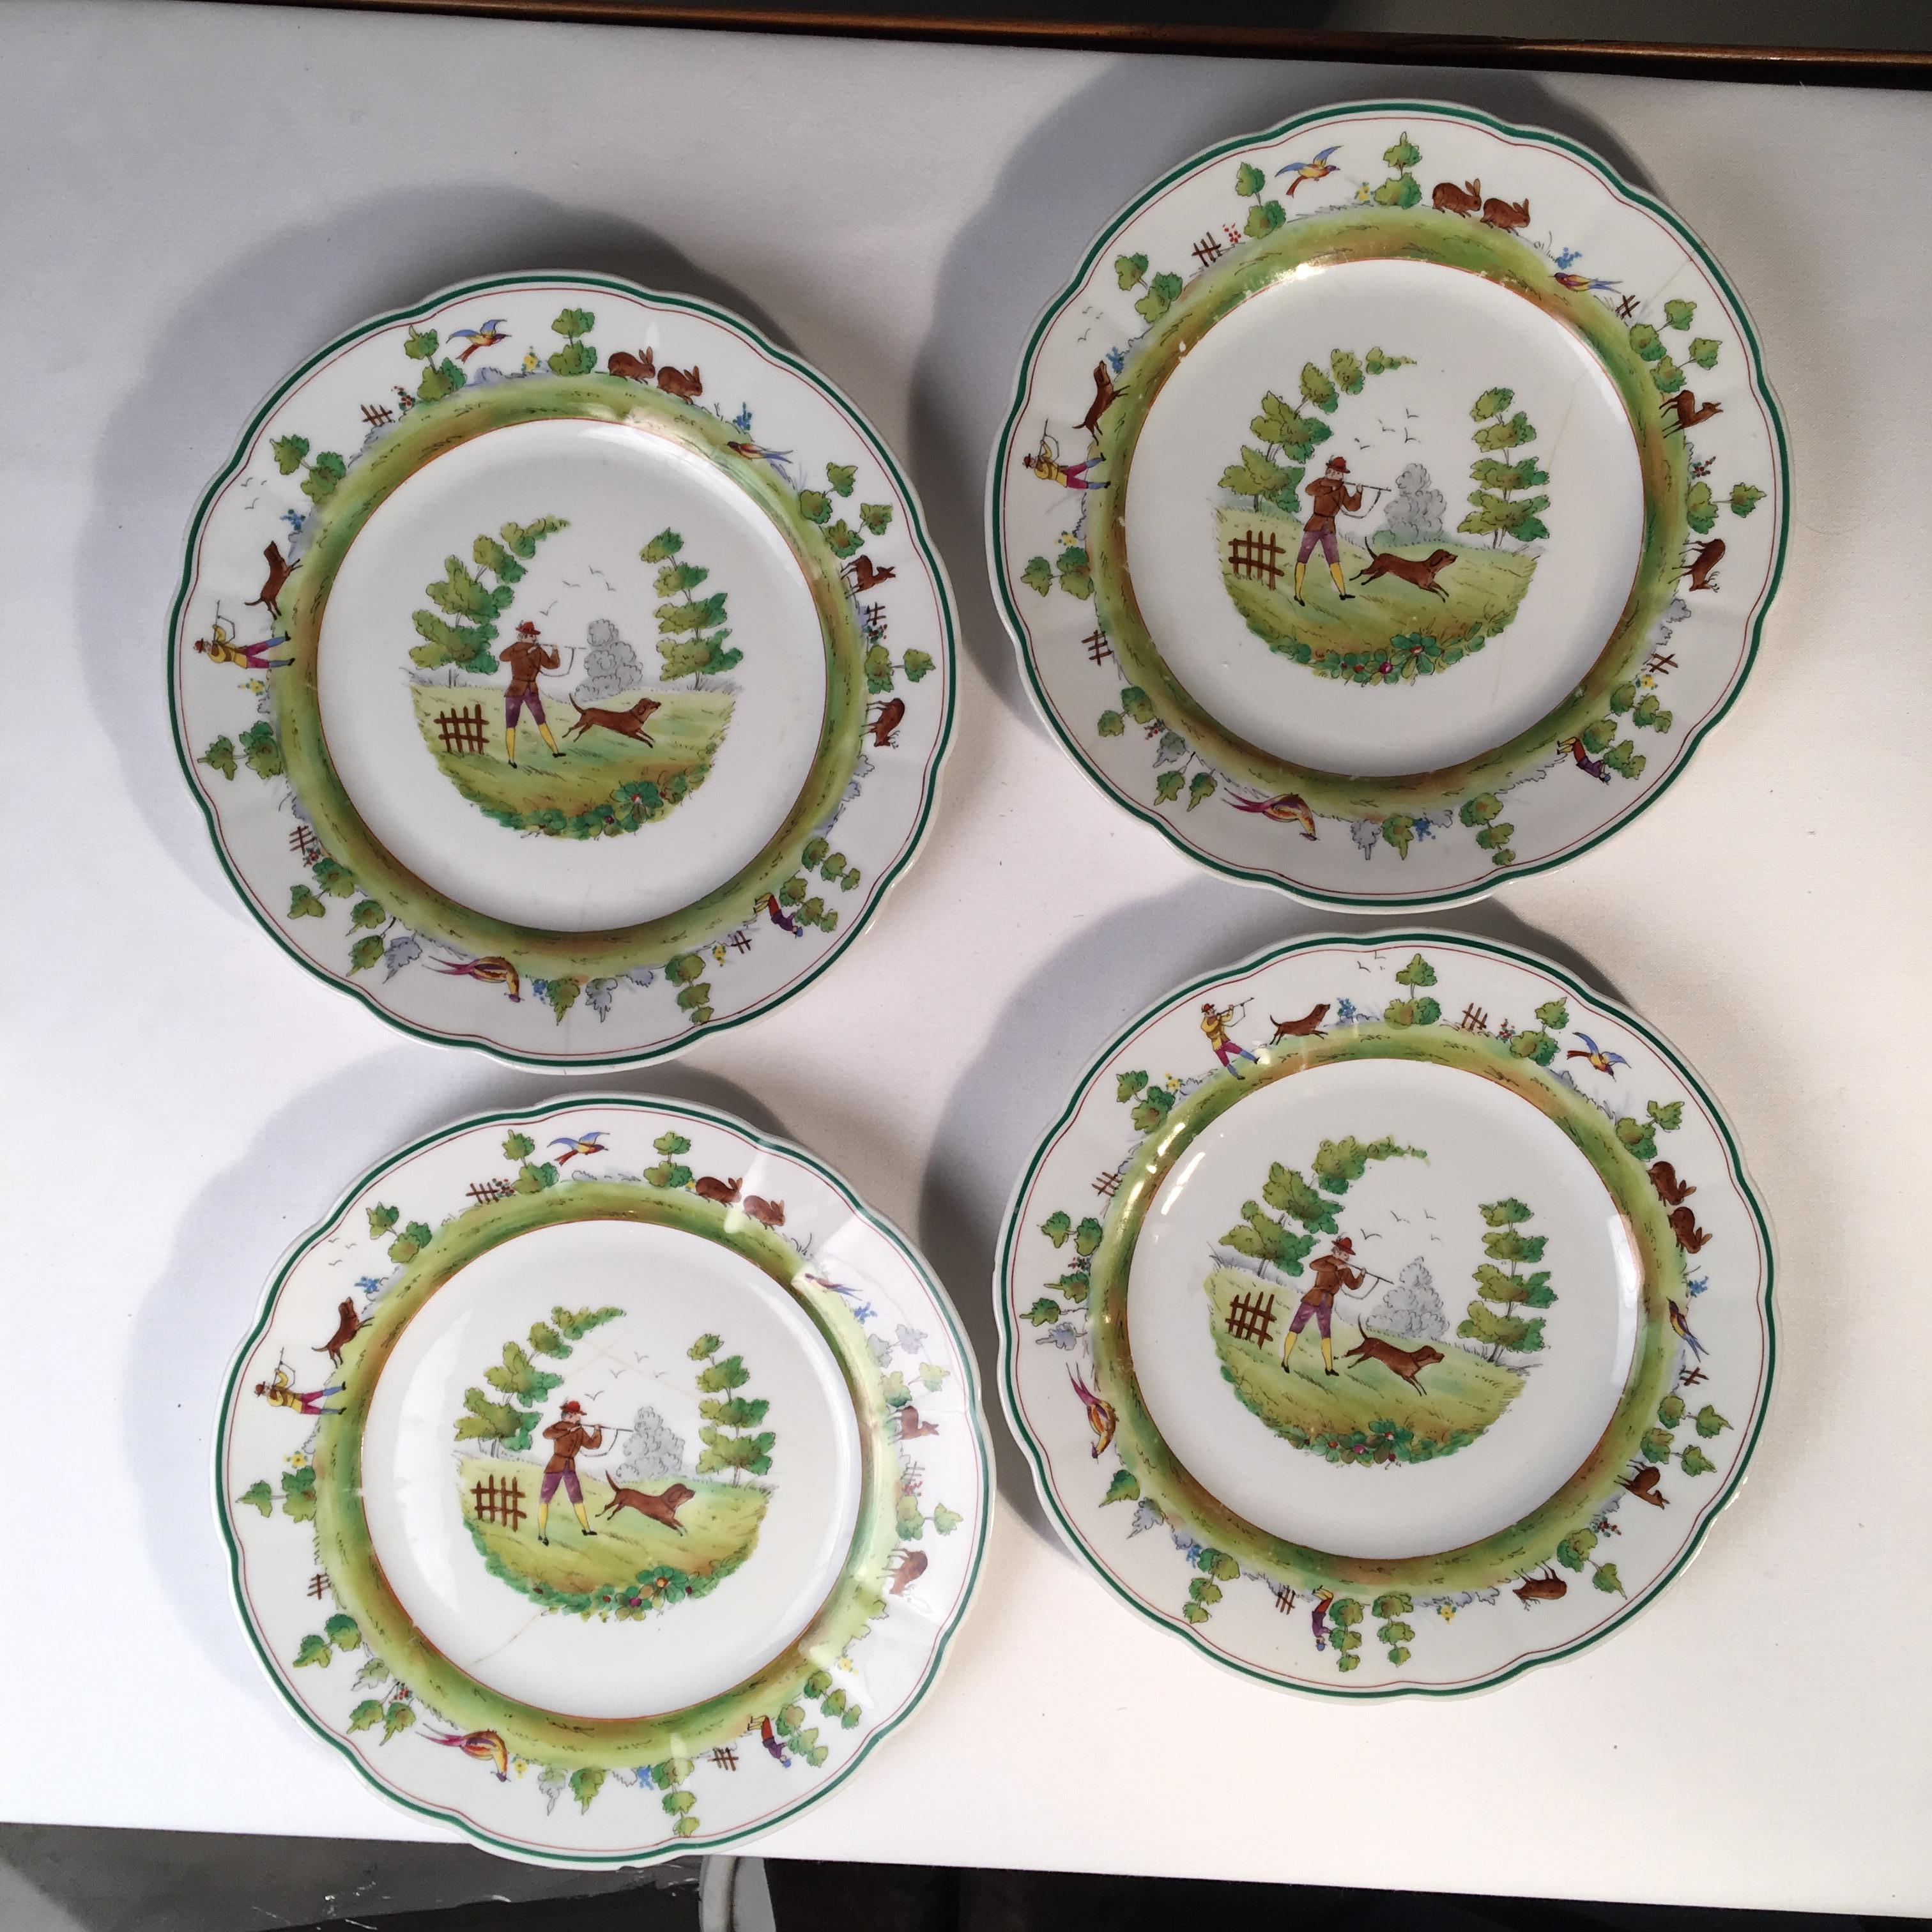 A set of 4 unusual Cowell & Hubbard hunting theme pictorial porcelain plates.